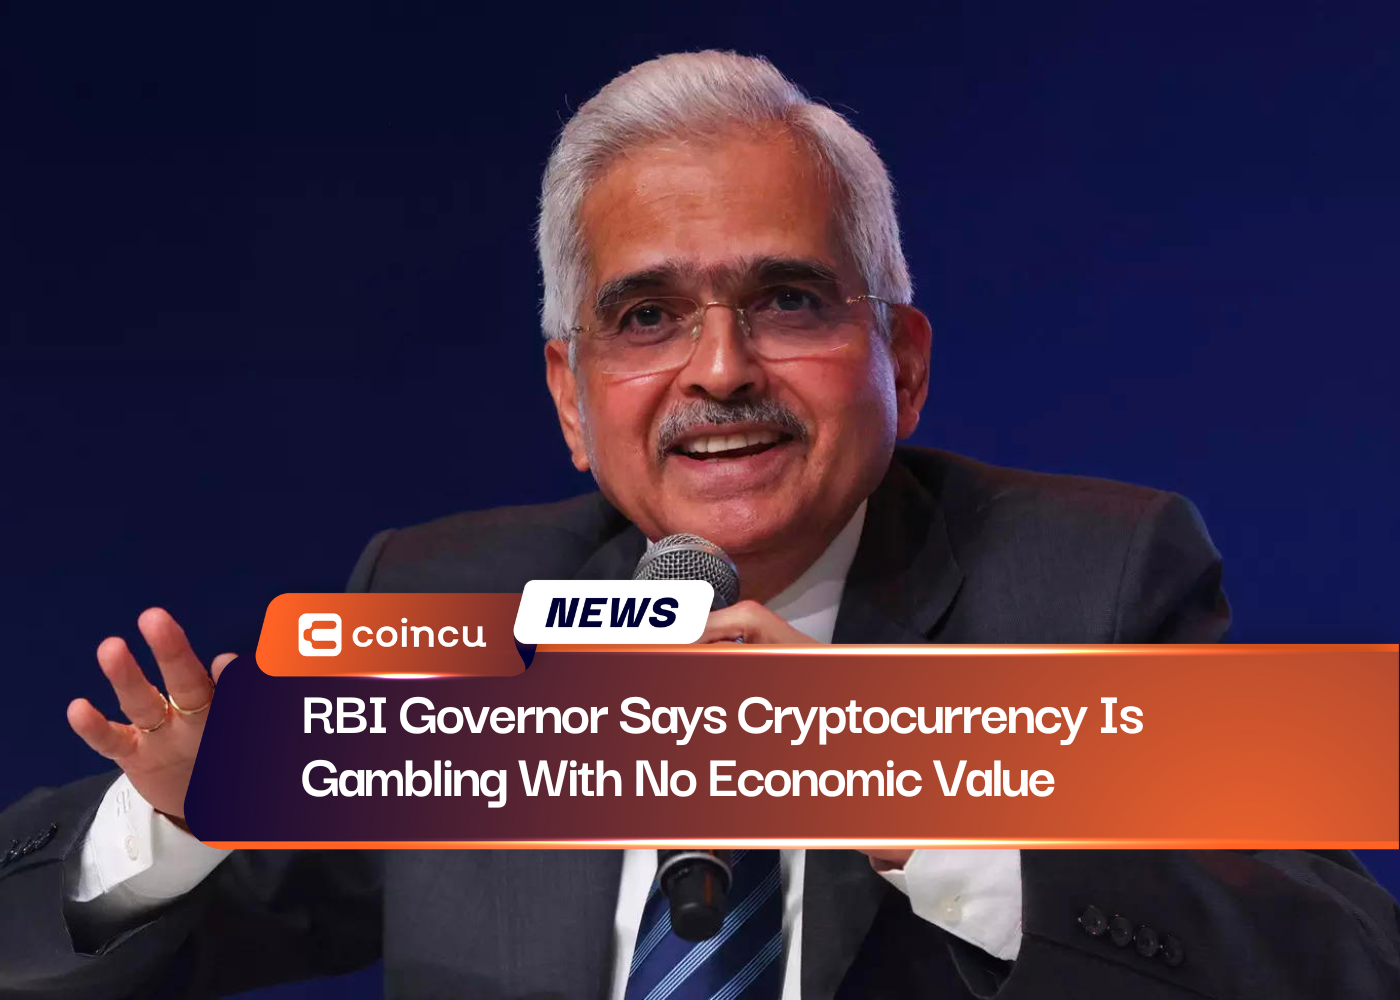 RBI Governor Says Cryptocurrency Is Gambling With No Economic Value